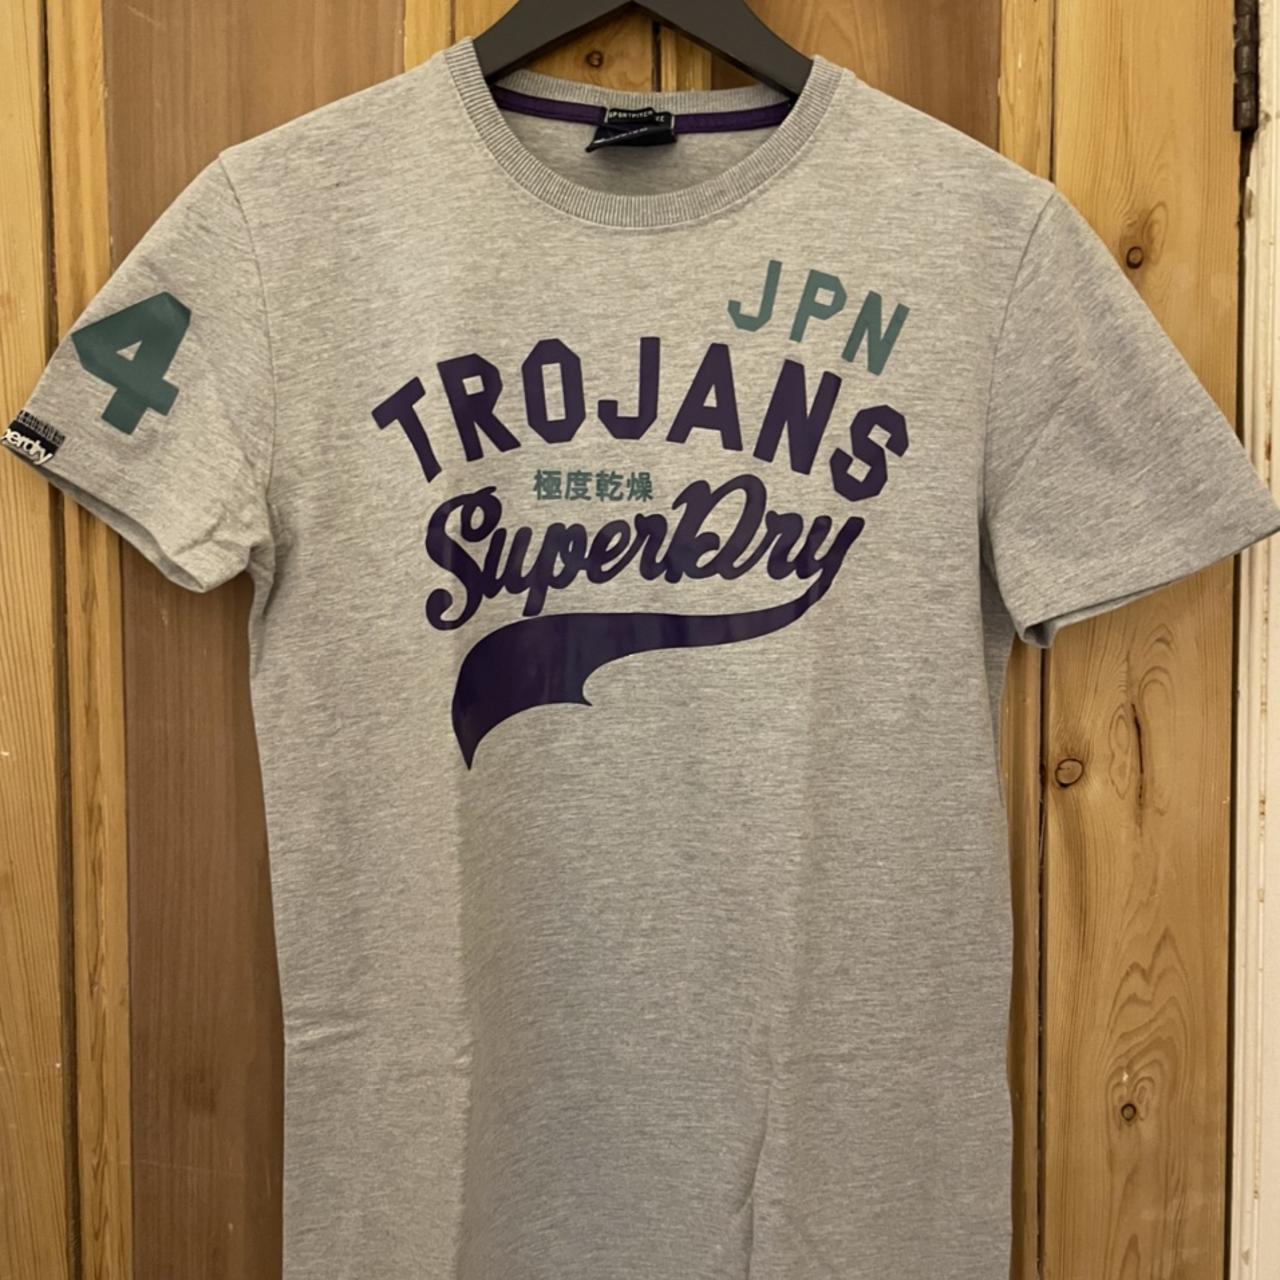 Superdry Men's Grey and Purple T-shirt